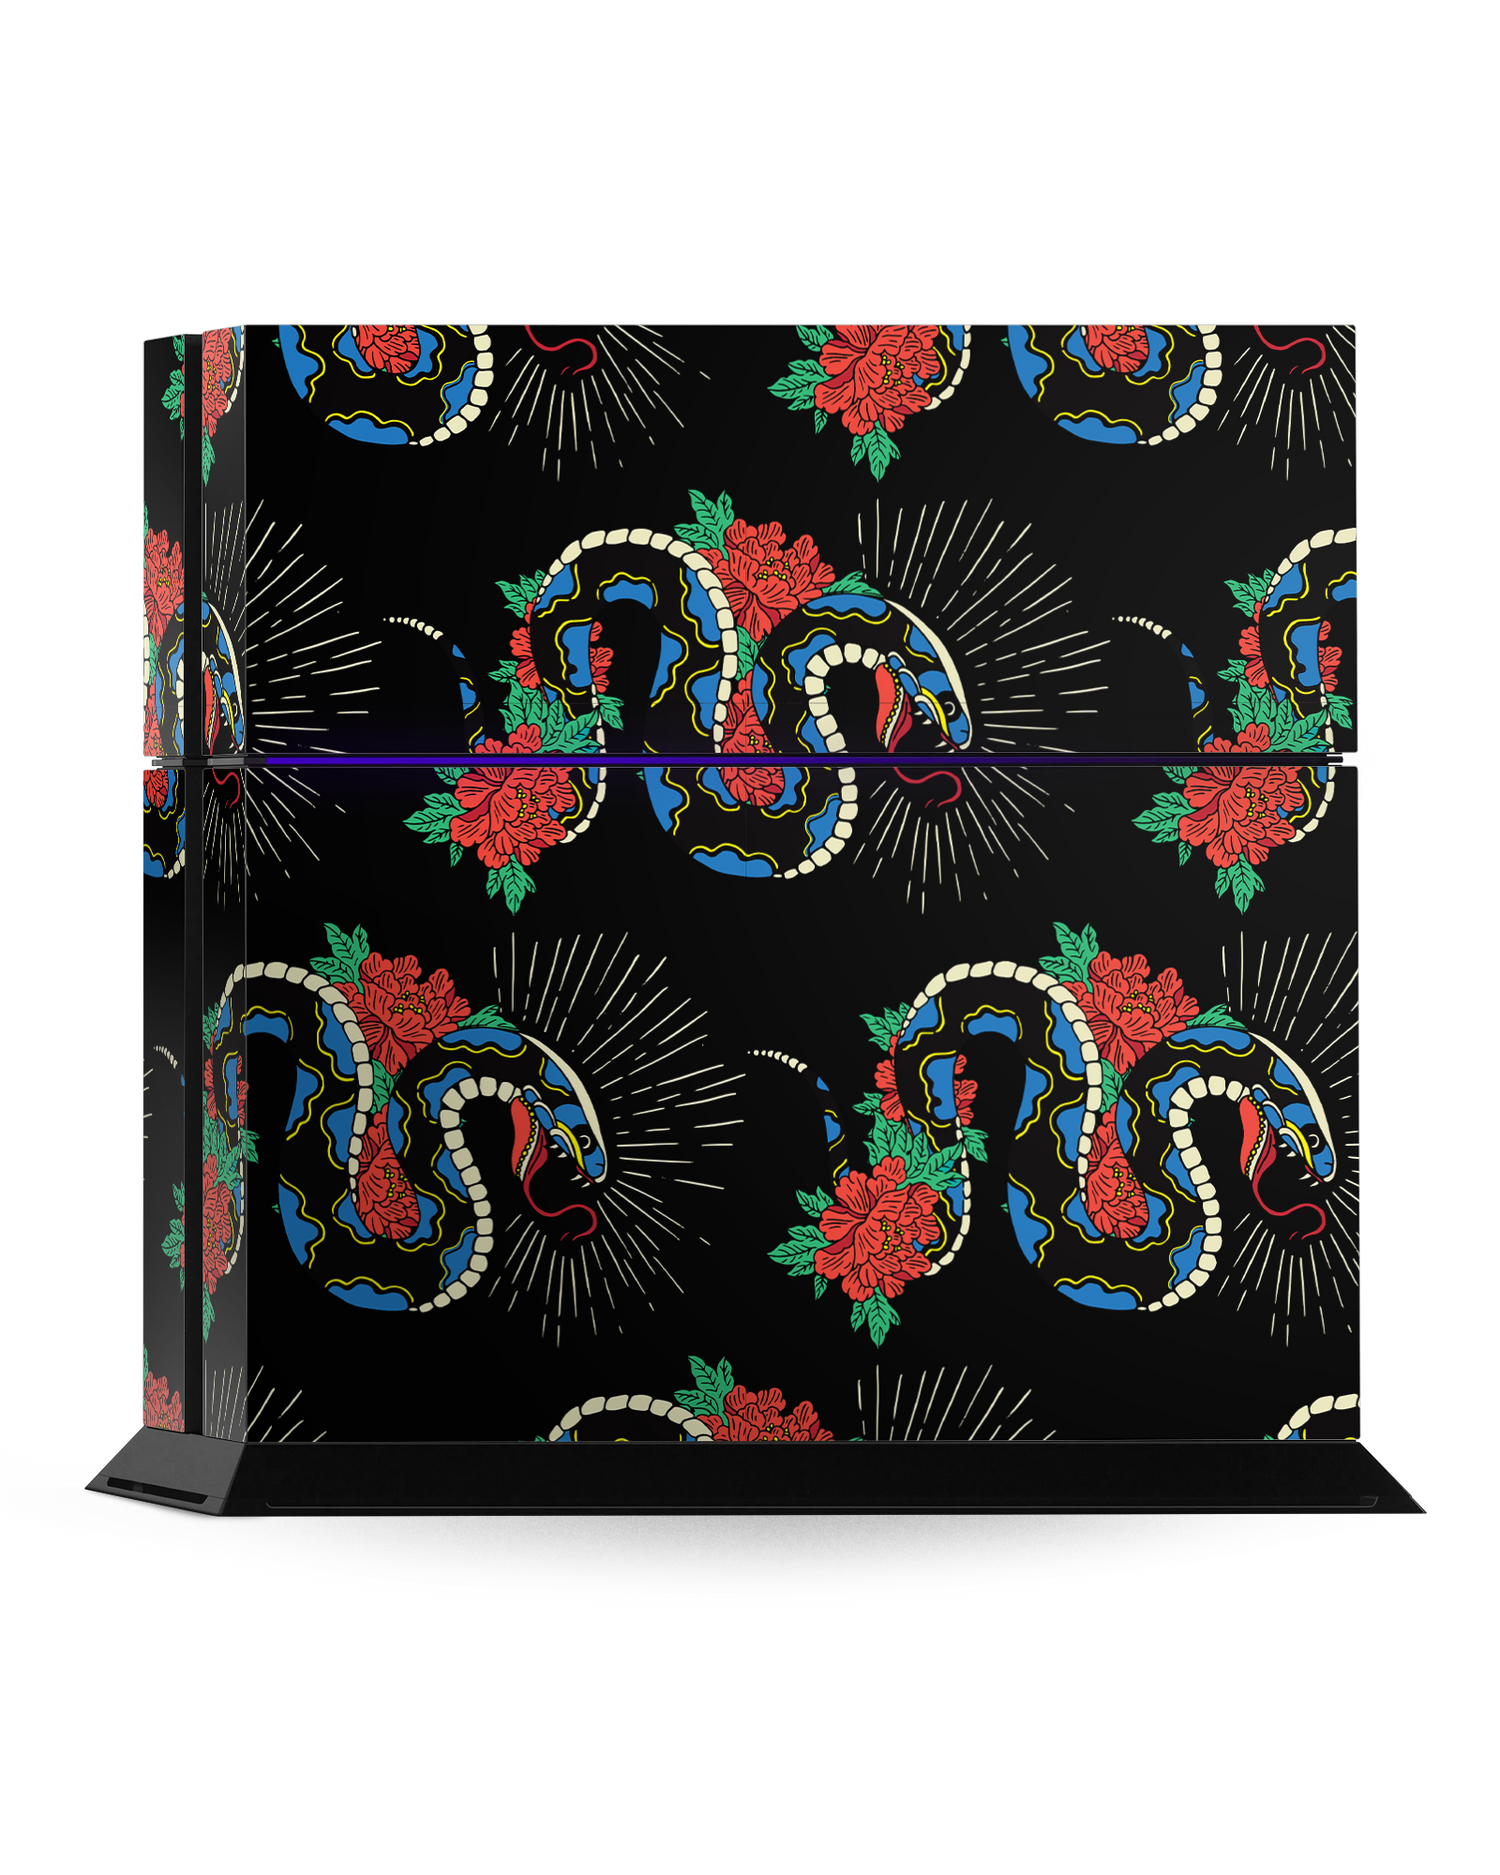 Repeating Snakes 2 Console Skin for Sony PlayStation 4: Standing